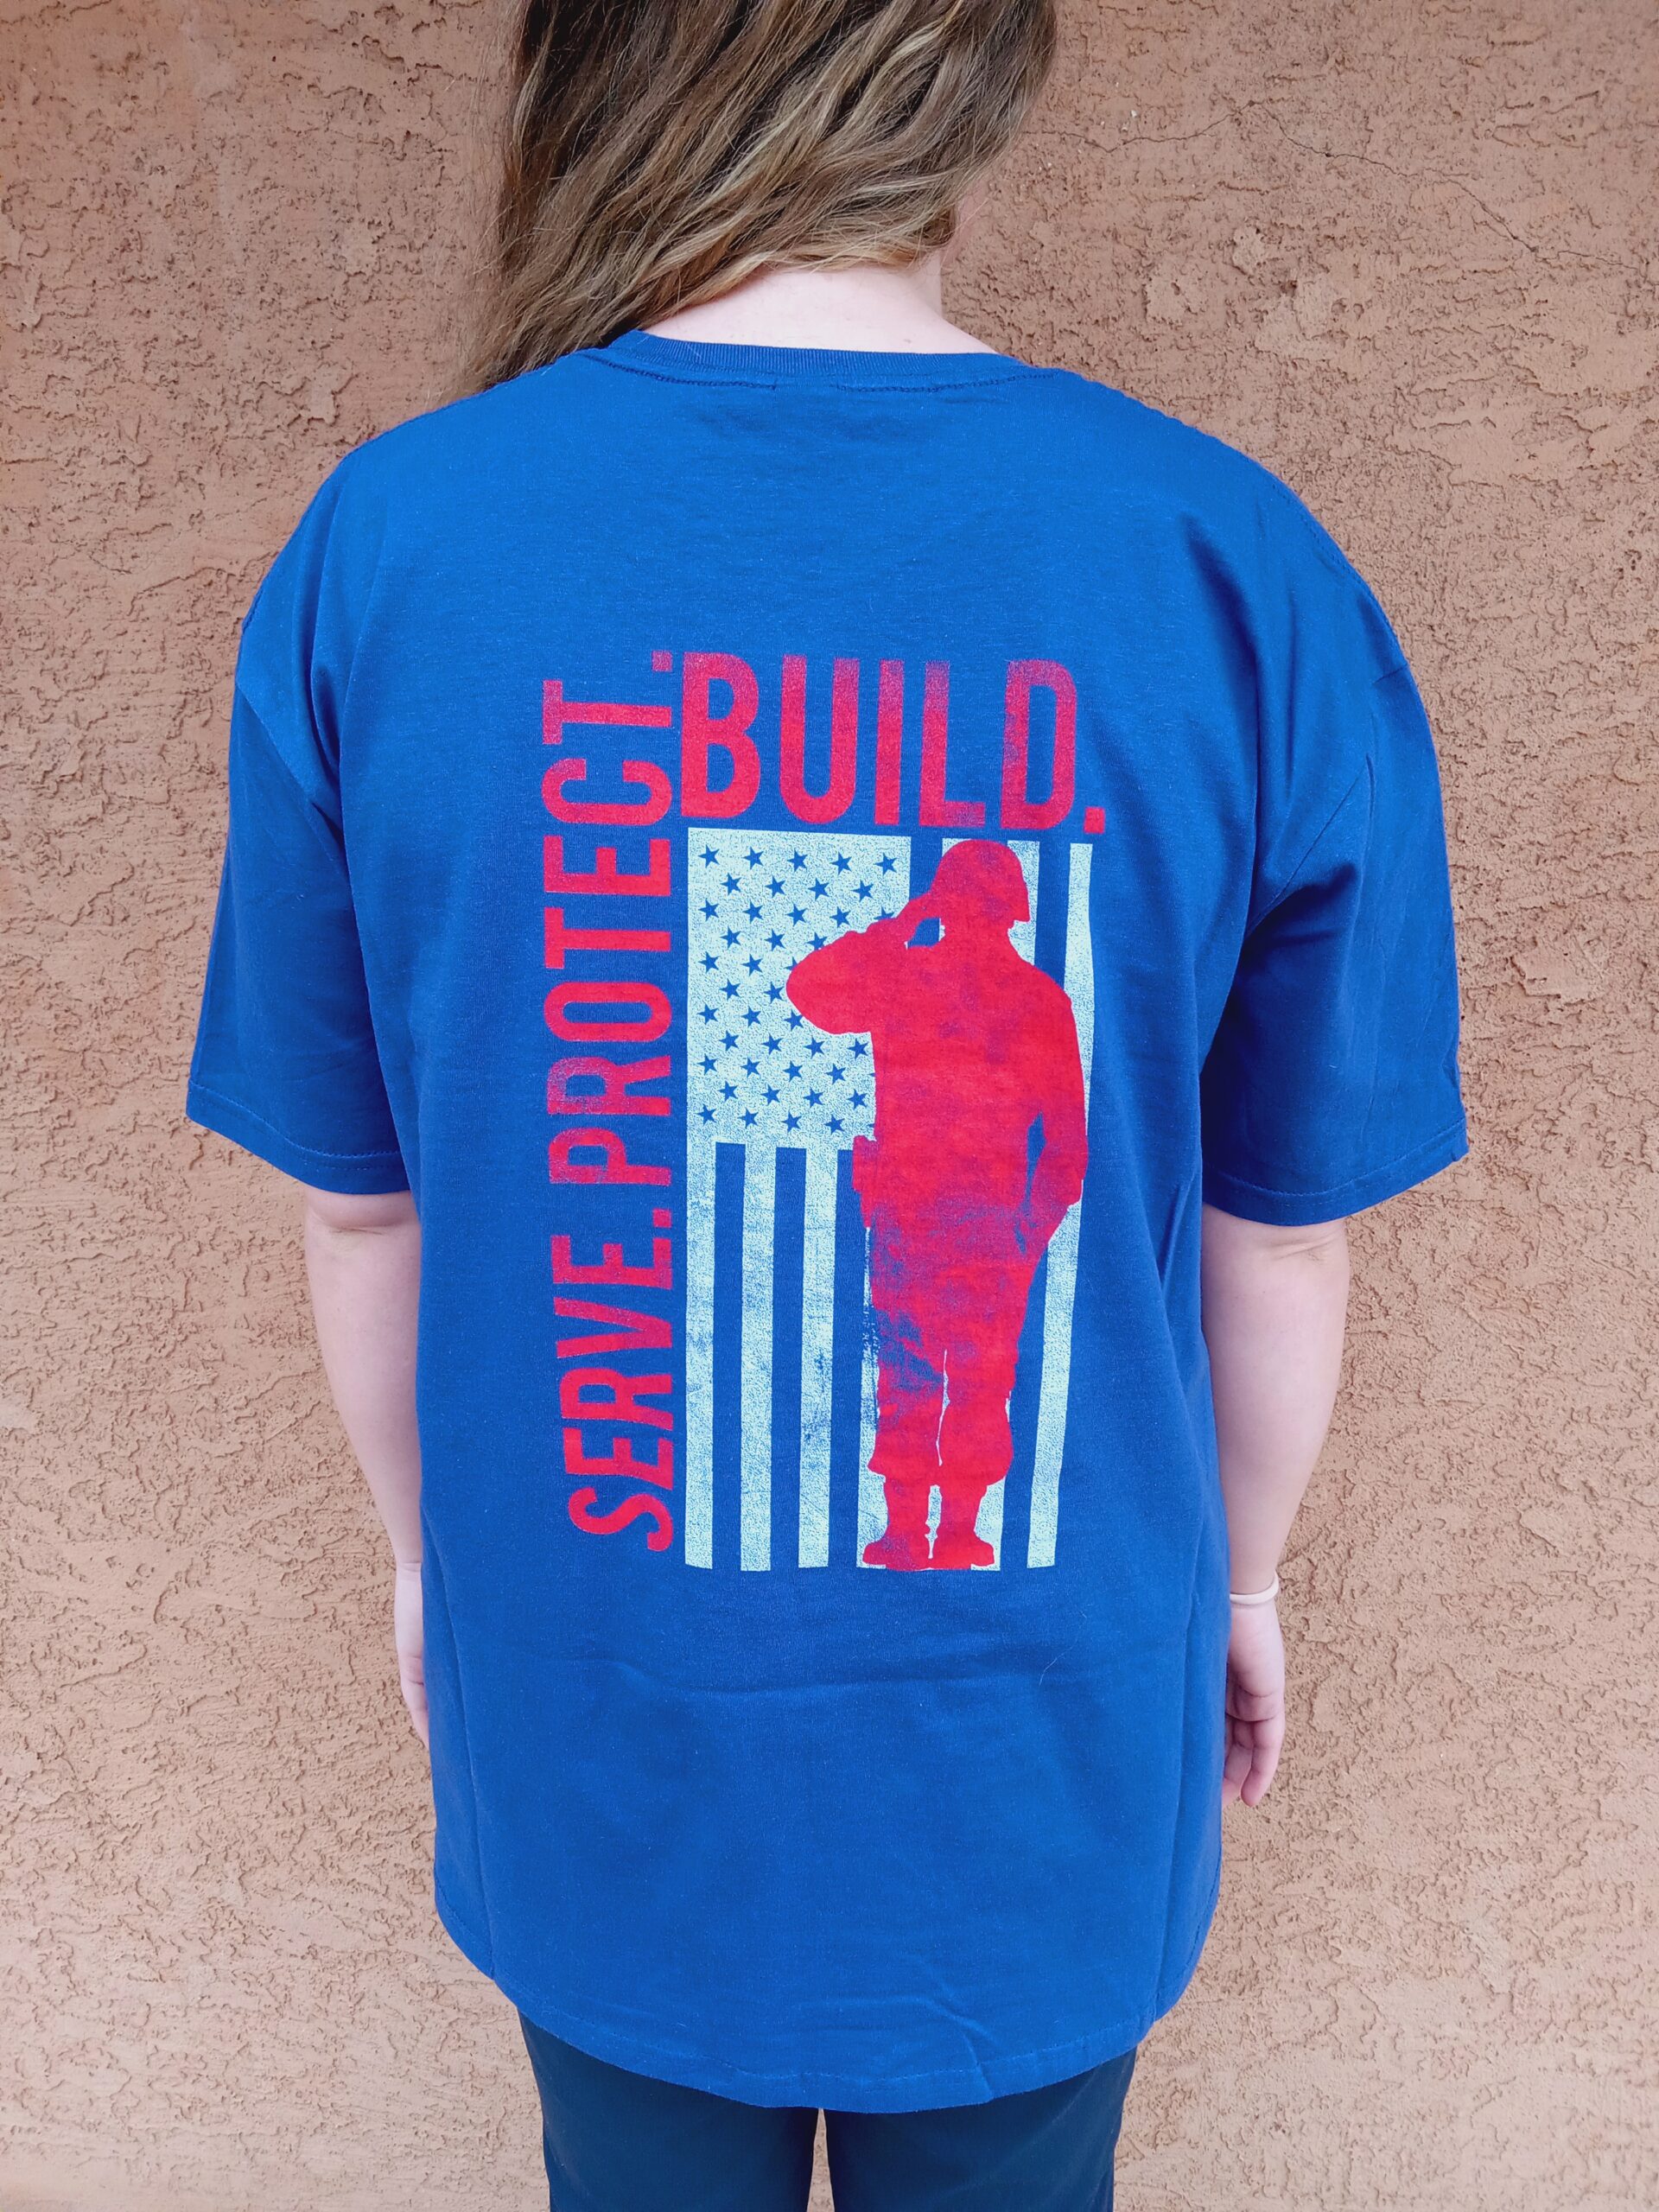 T-shirt for volunteers who are also veterans reading Serve. Protect. Build.